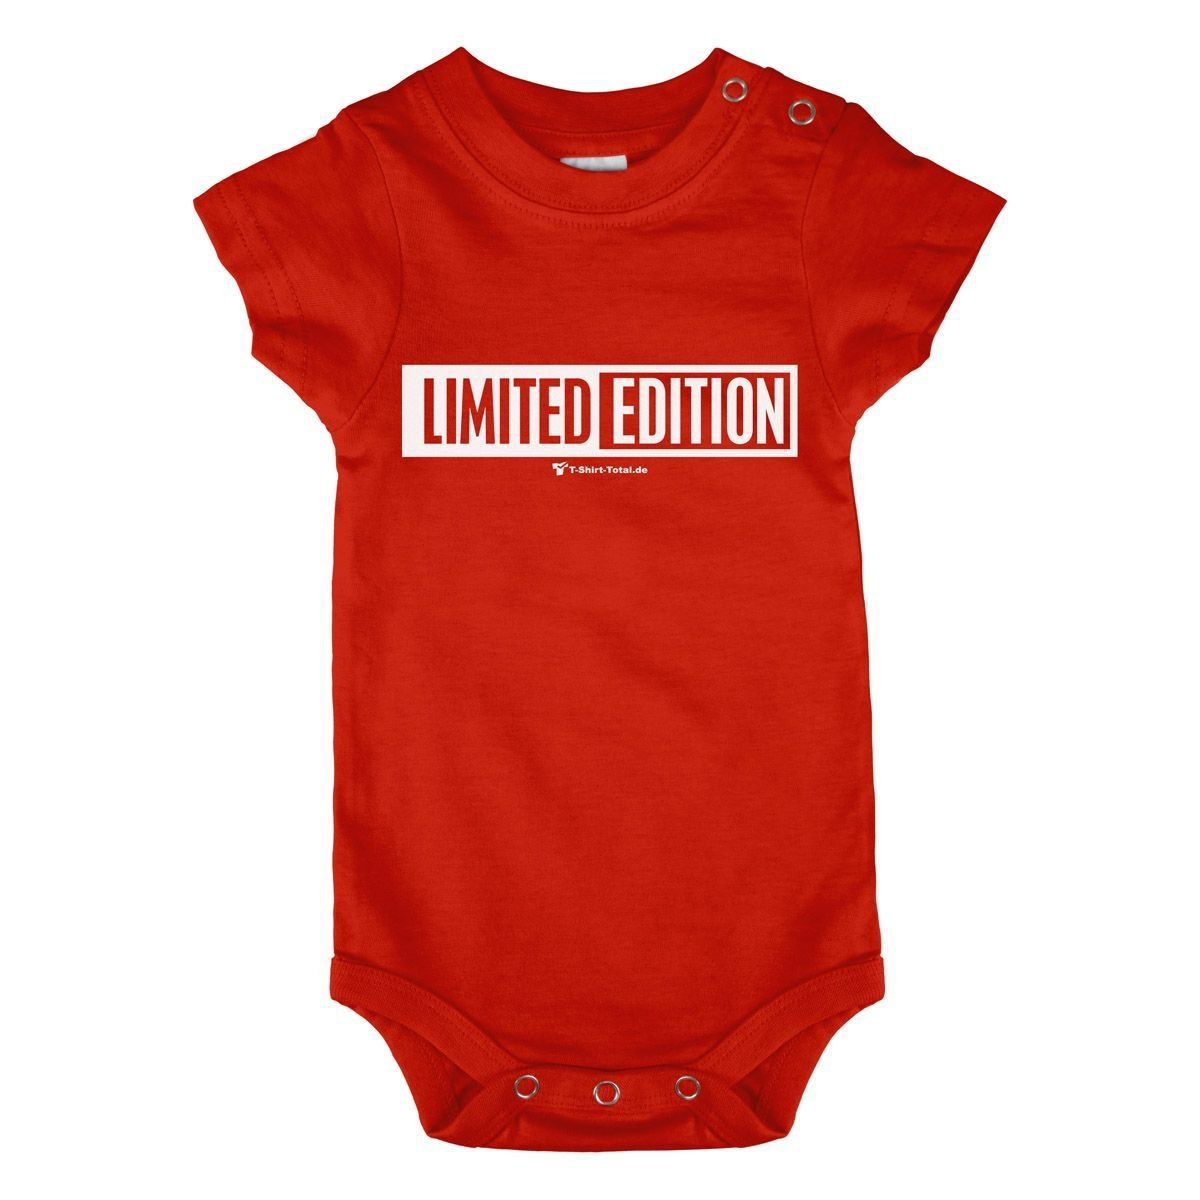 Limited Edition Baby Body Kurzarm rot 68 / 74